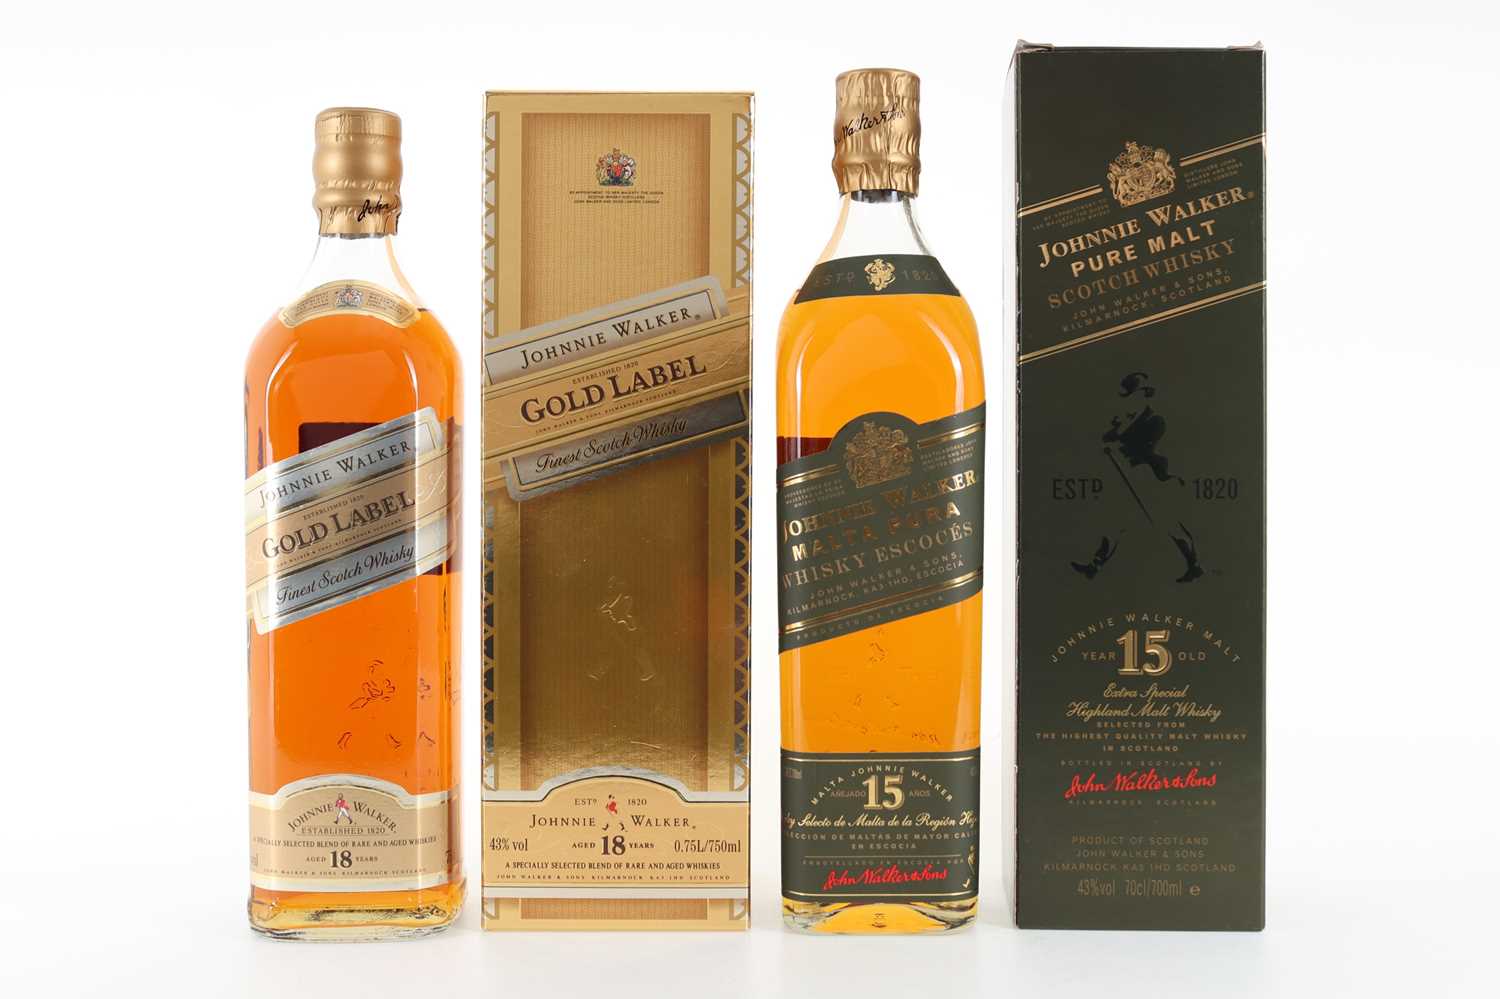 JOHNNIE WALKER 18 YEAR OLD GOLD LABEL 75CL AND 15 YEAR OLD GREEN LABEL BLENDED WHISKY